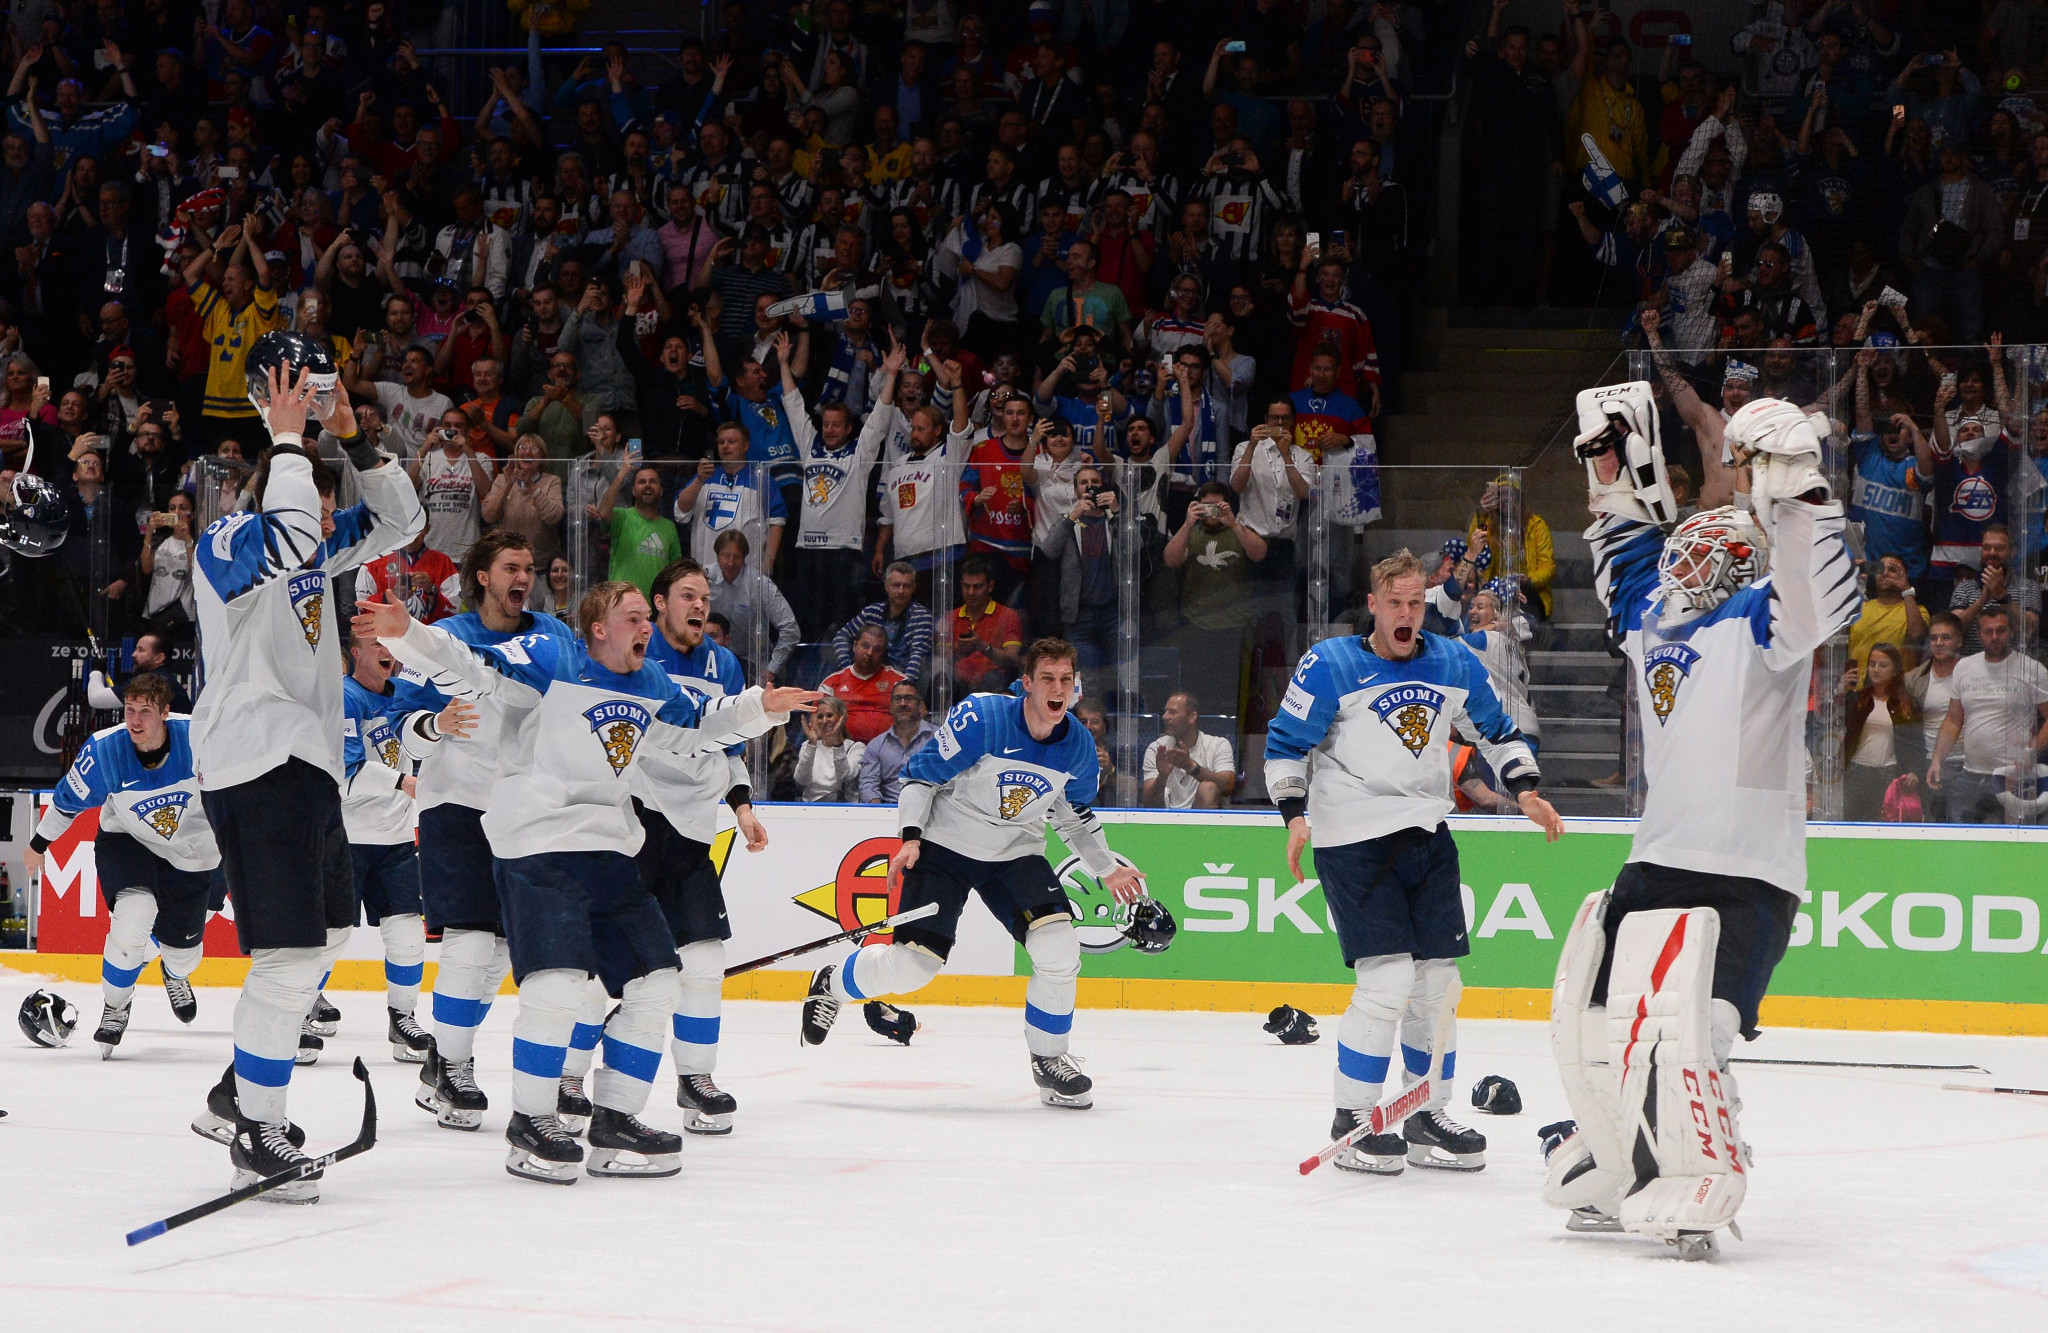 Finland ready to defend IIHF World Championship crown in Riga